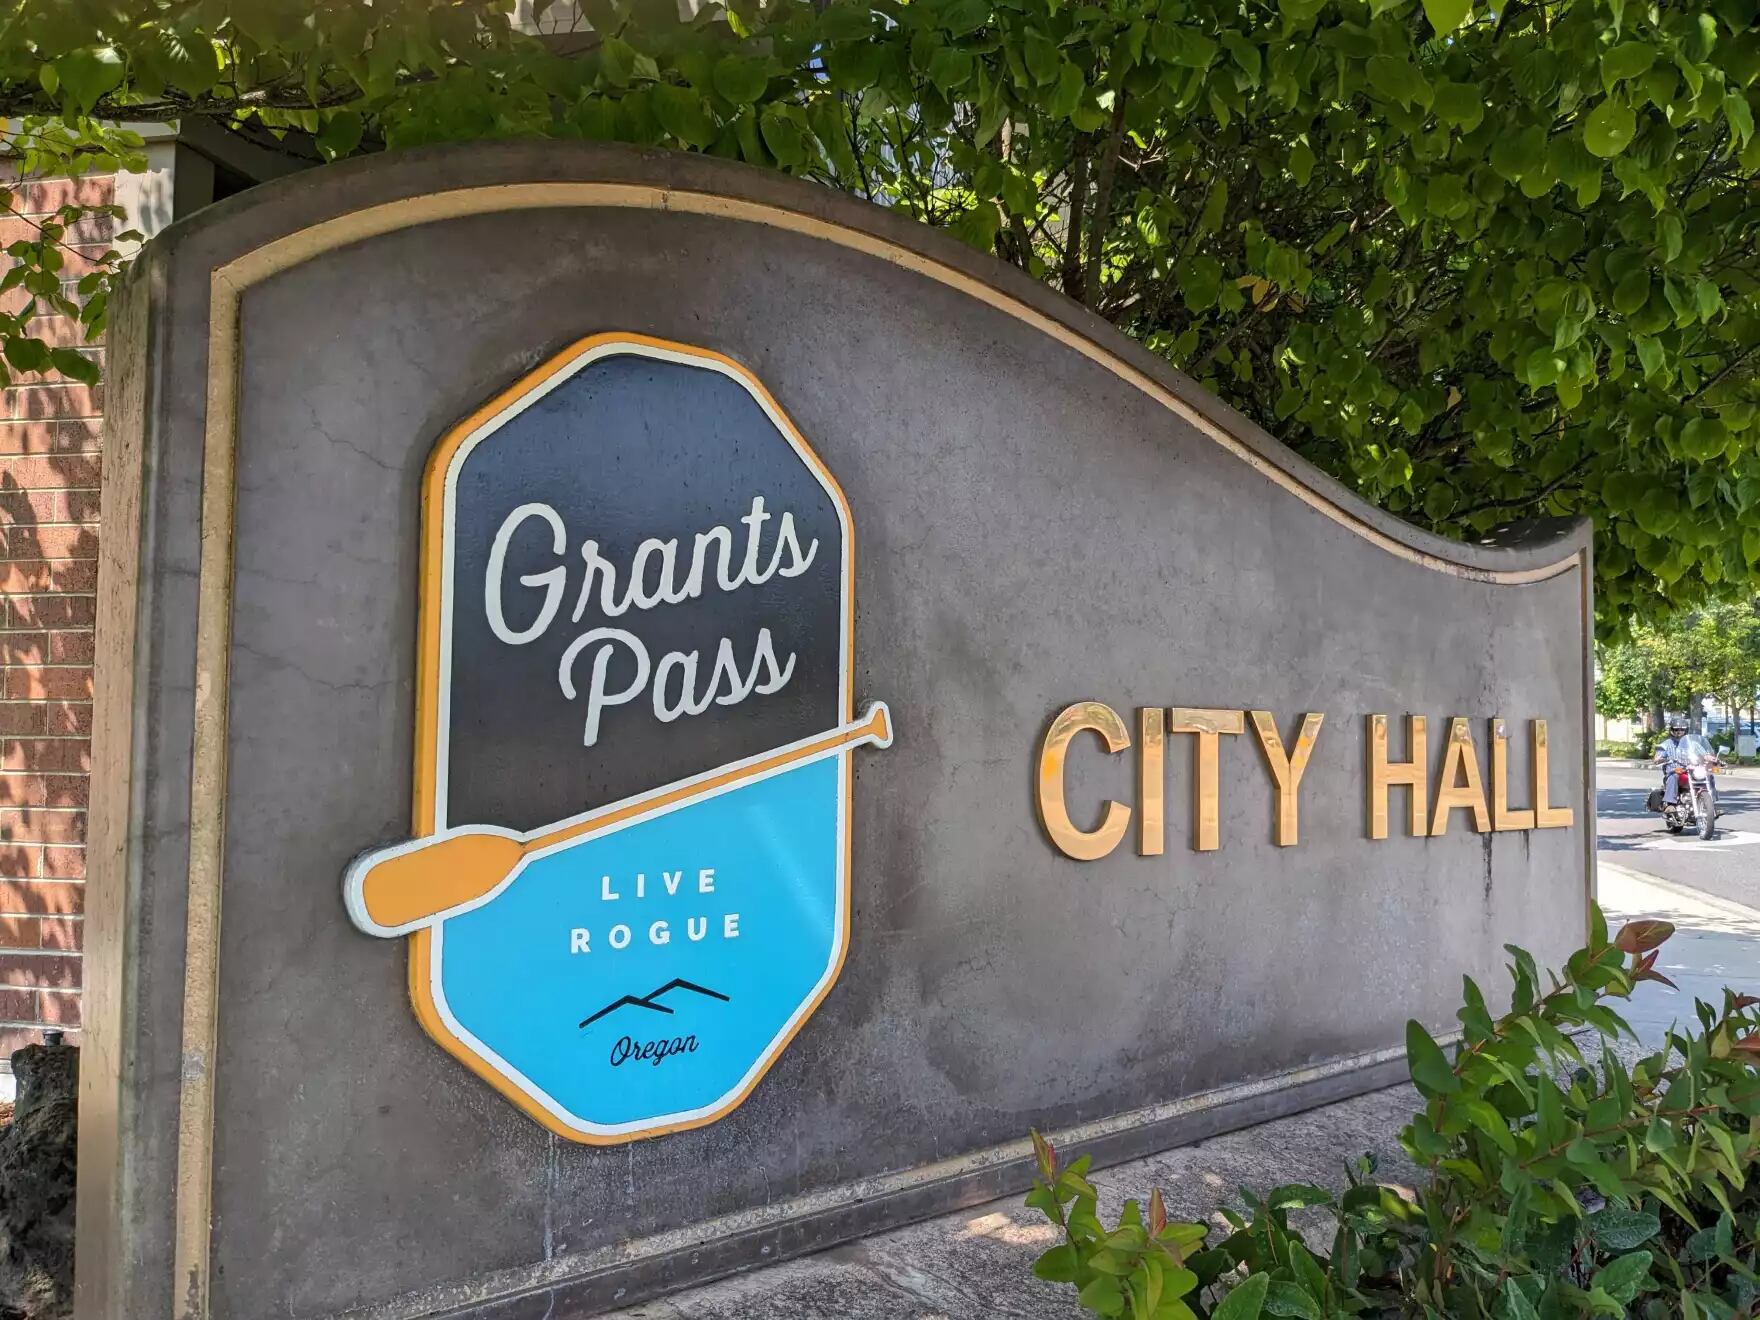 The City Hall in Grants Pass. The Grants Pass City Council unanimously approved a special use permit for a new shelter site for homeless people on April 17.